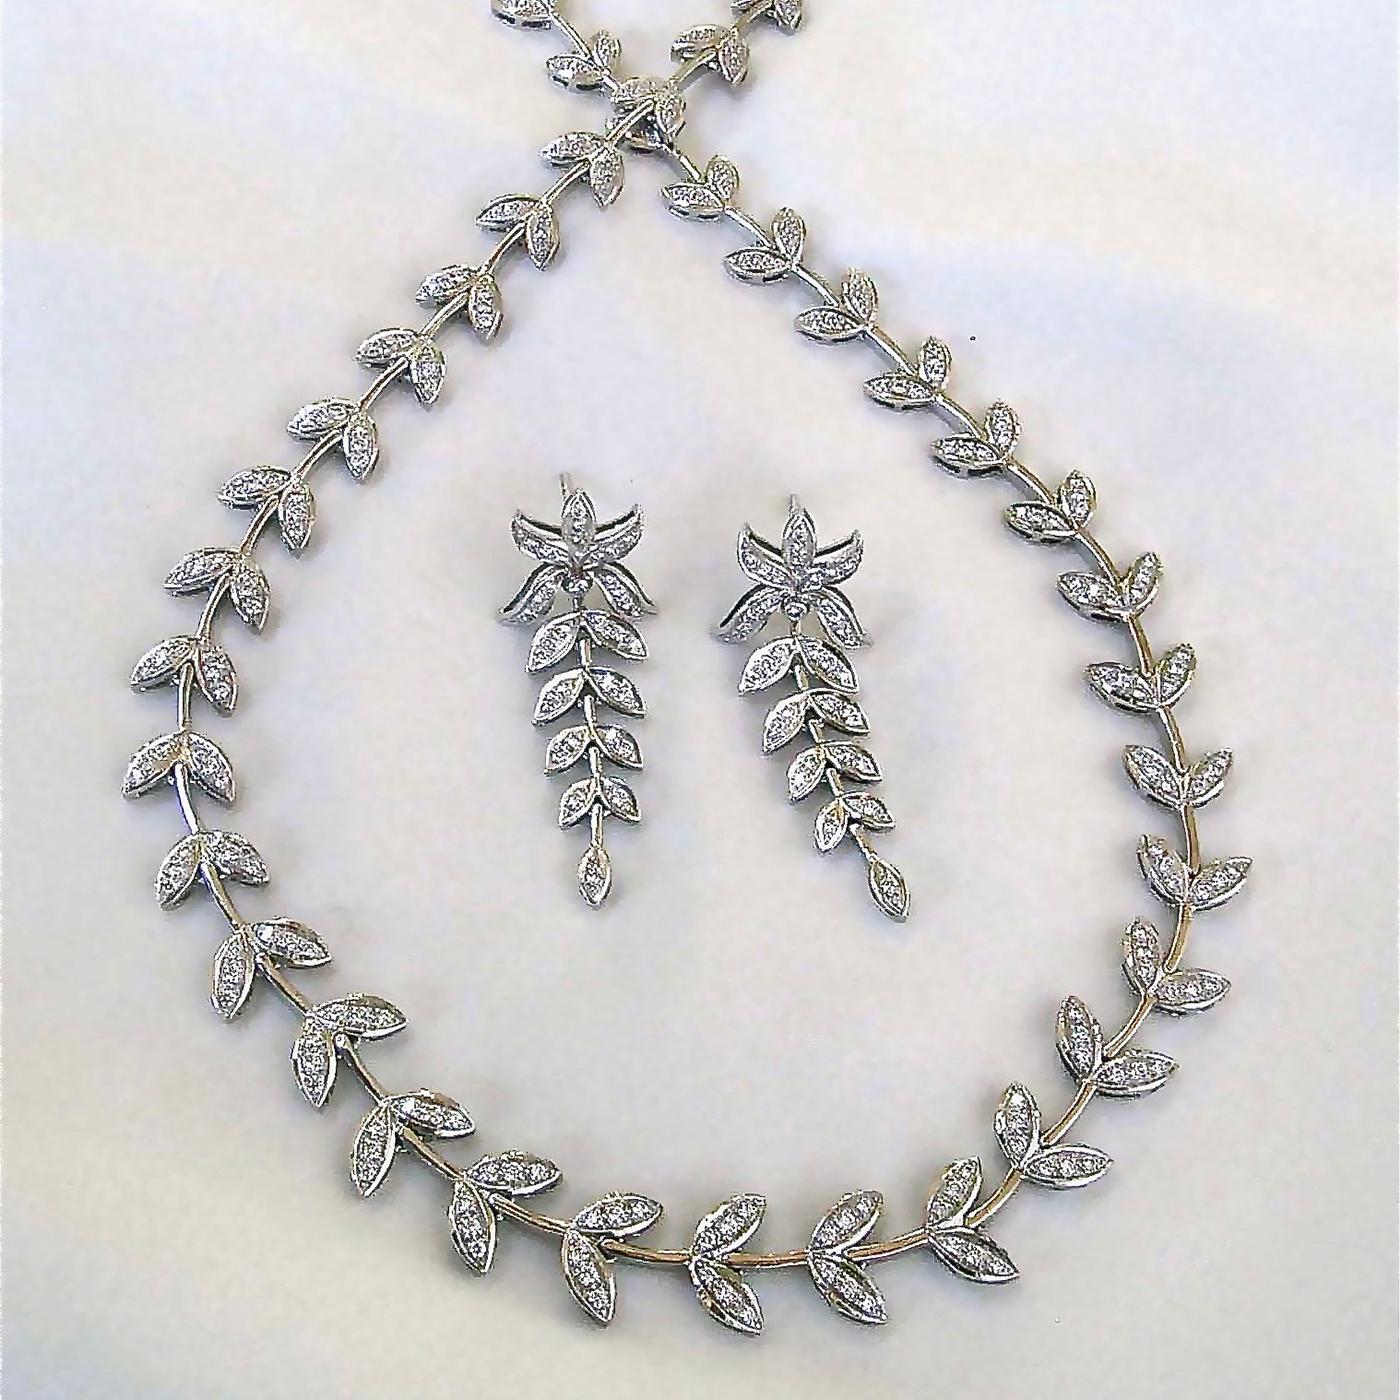 The organic leaf pattern earrings have a lot of movement and shine from afar.  0.95cts. of Diamonds are used to give sparkle and elegance.  Wearable luxury that can be worn with jeans and white blouse, or out to any formal dinner.  Been worn as